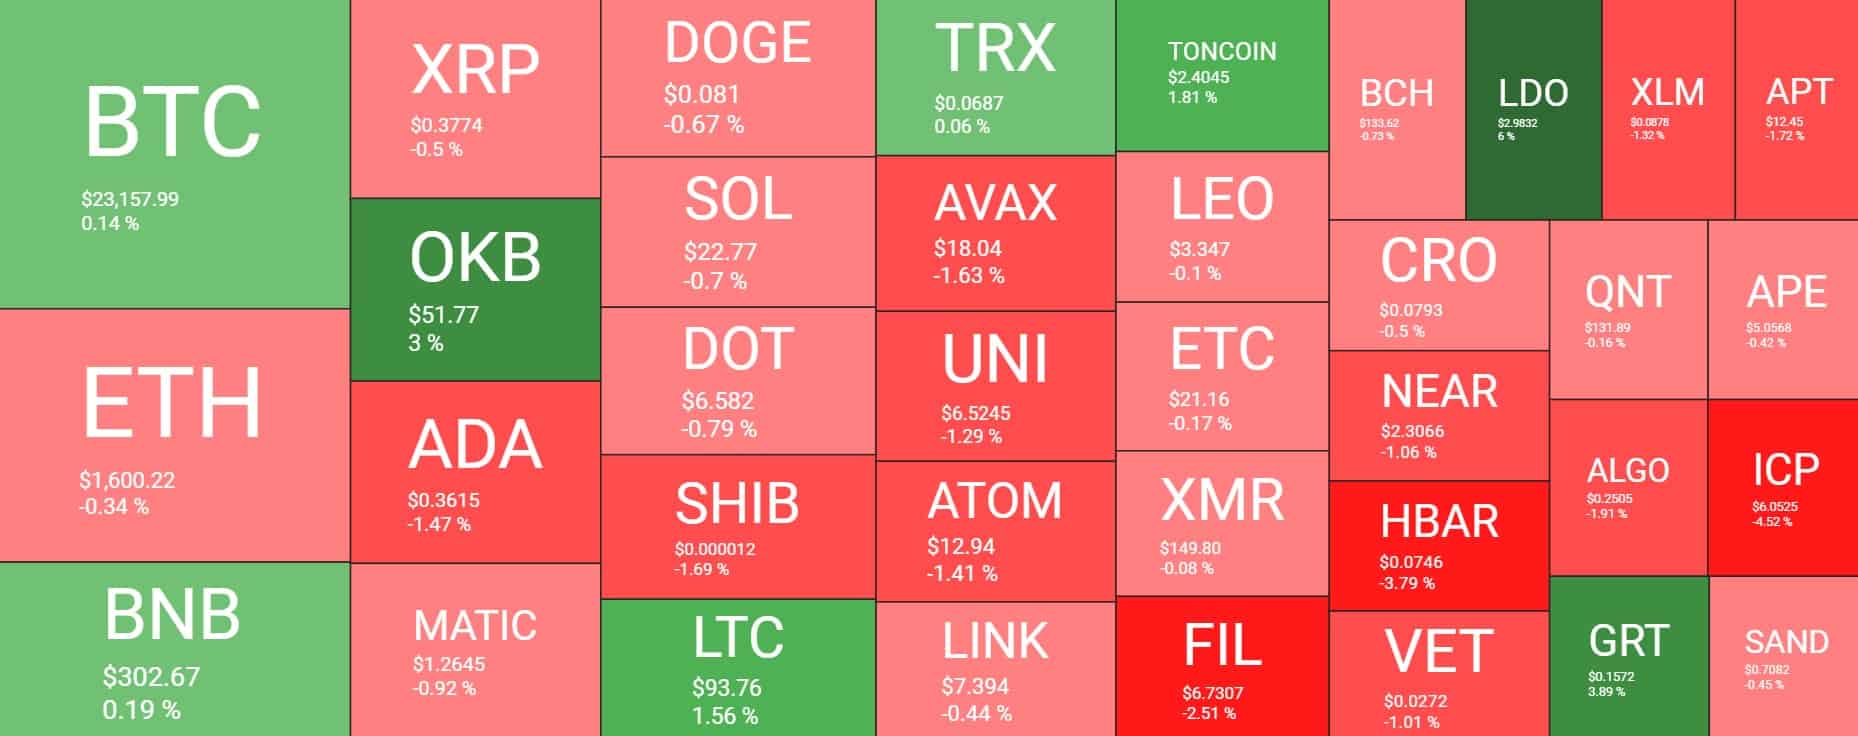 Cryptocurrency Market Overview. Source: Quantify Crypto